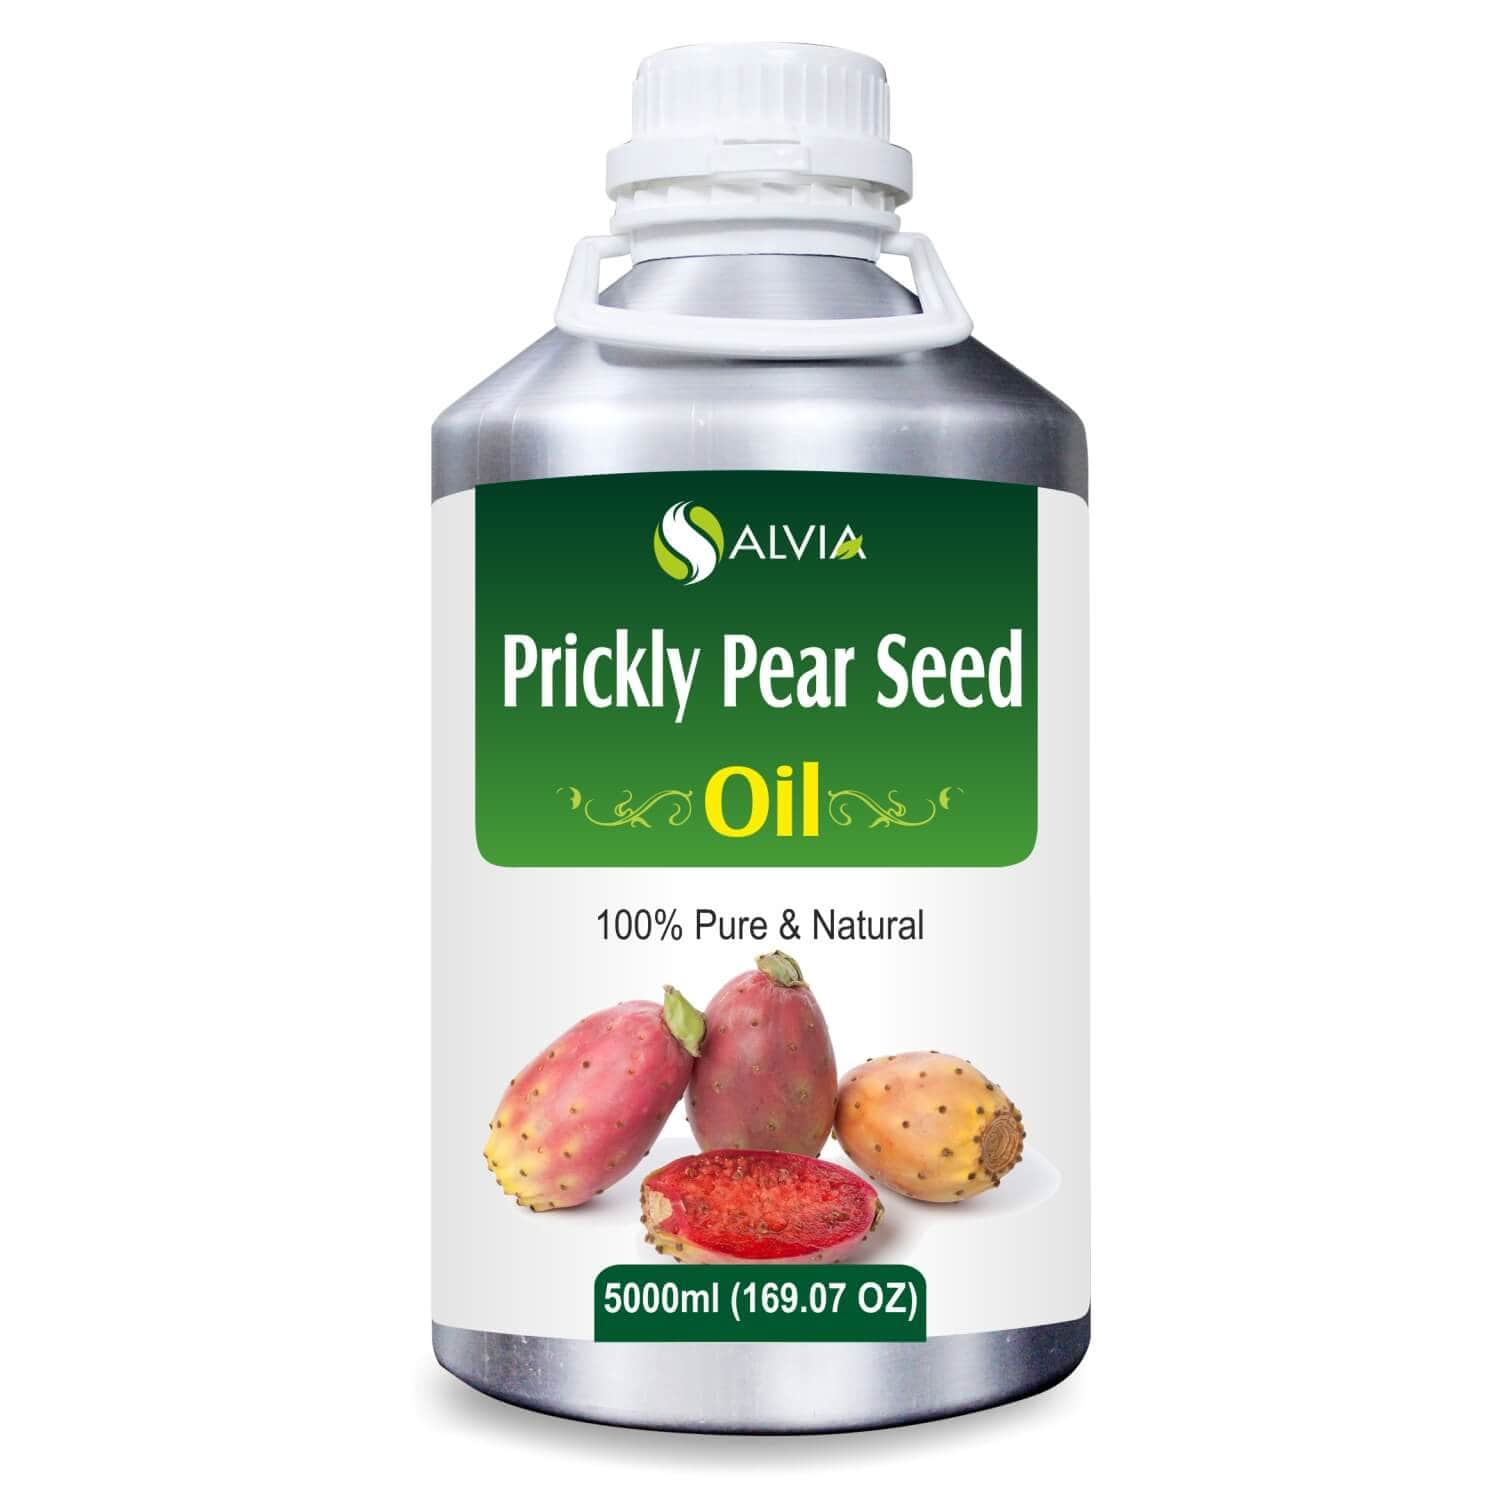 PRICKLY PEAR SEED CACTUS Oil ( .5 and 1 oz)